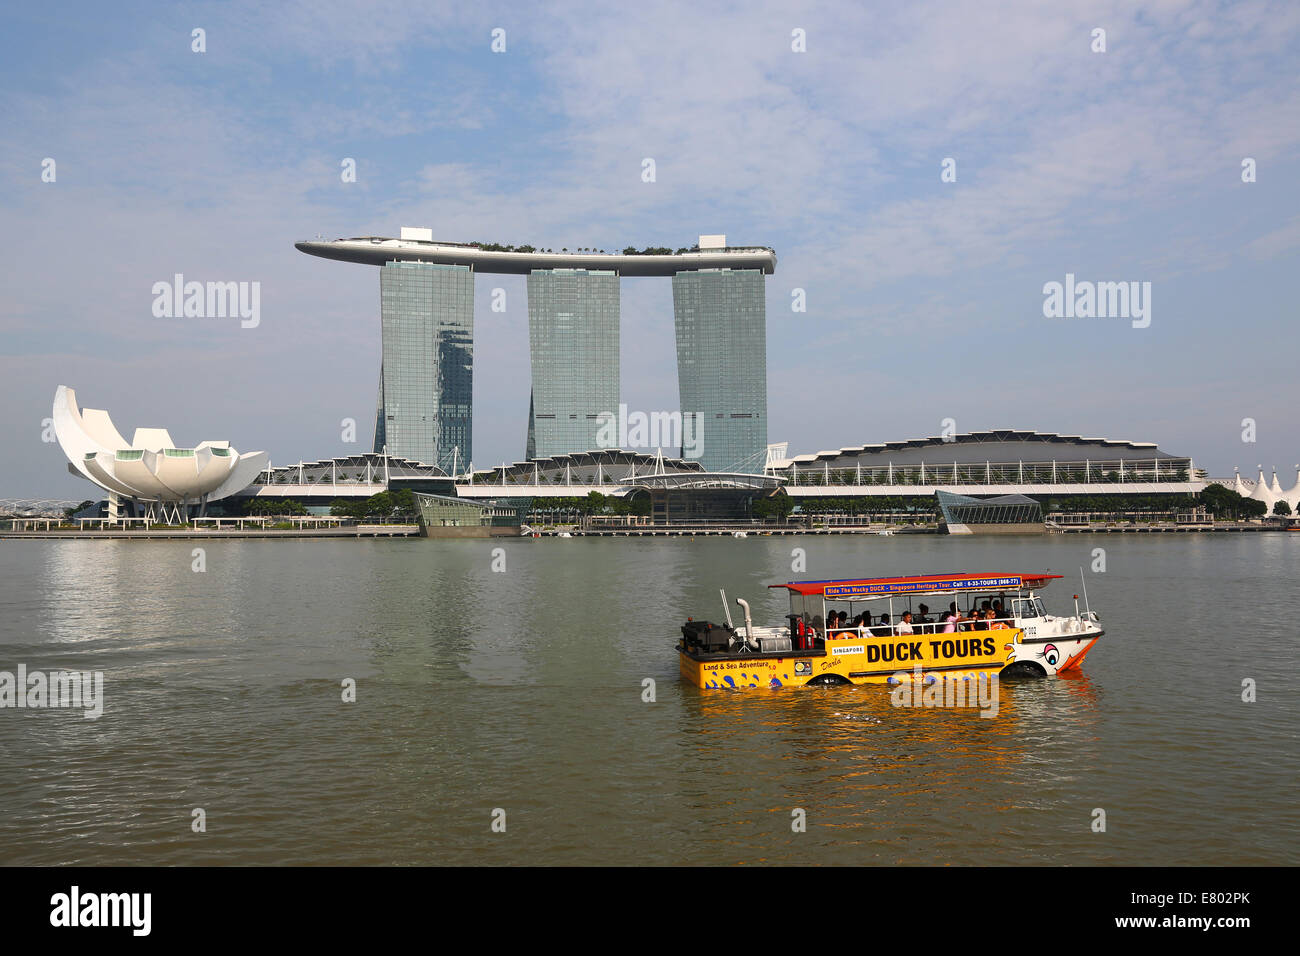 Duck tours for sightseeing tourists in Marina Bay with the Marina Bay Sands Hotel in Singapore, Republic of Singapore Stock Photo